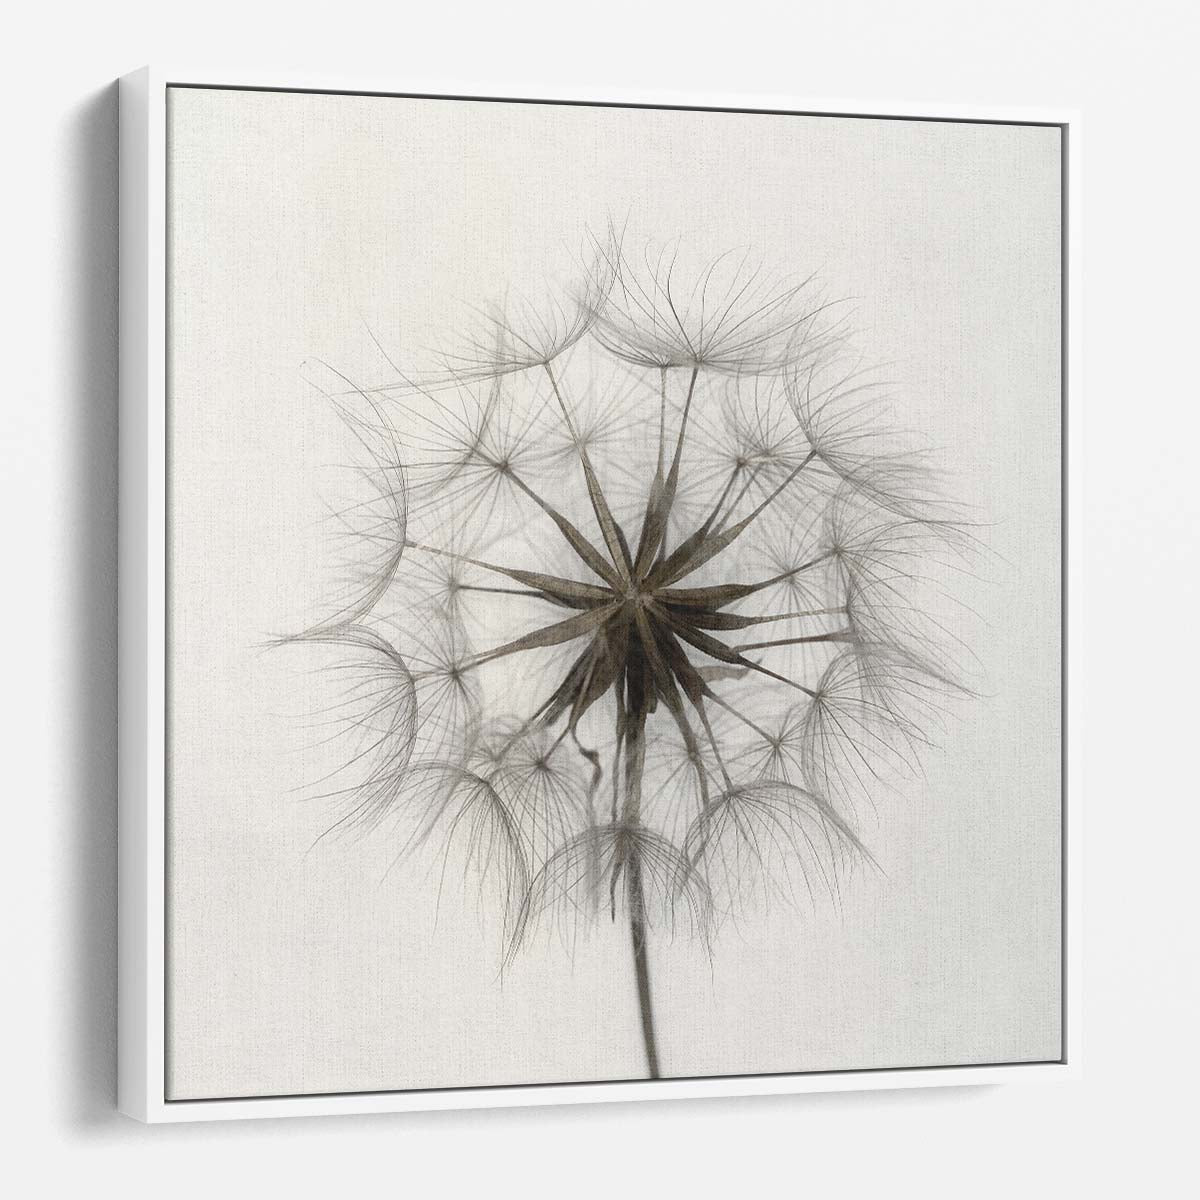 Tragopogon Minimalist Macro Photography Wall Art by Luxuriance Designs. Made in USA.